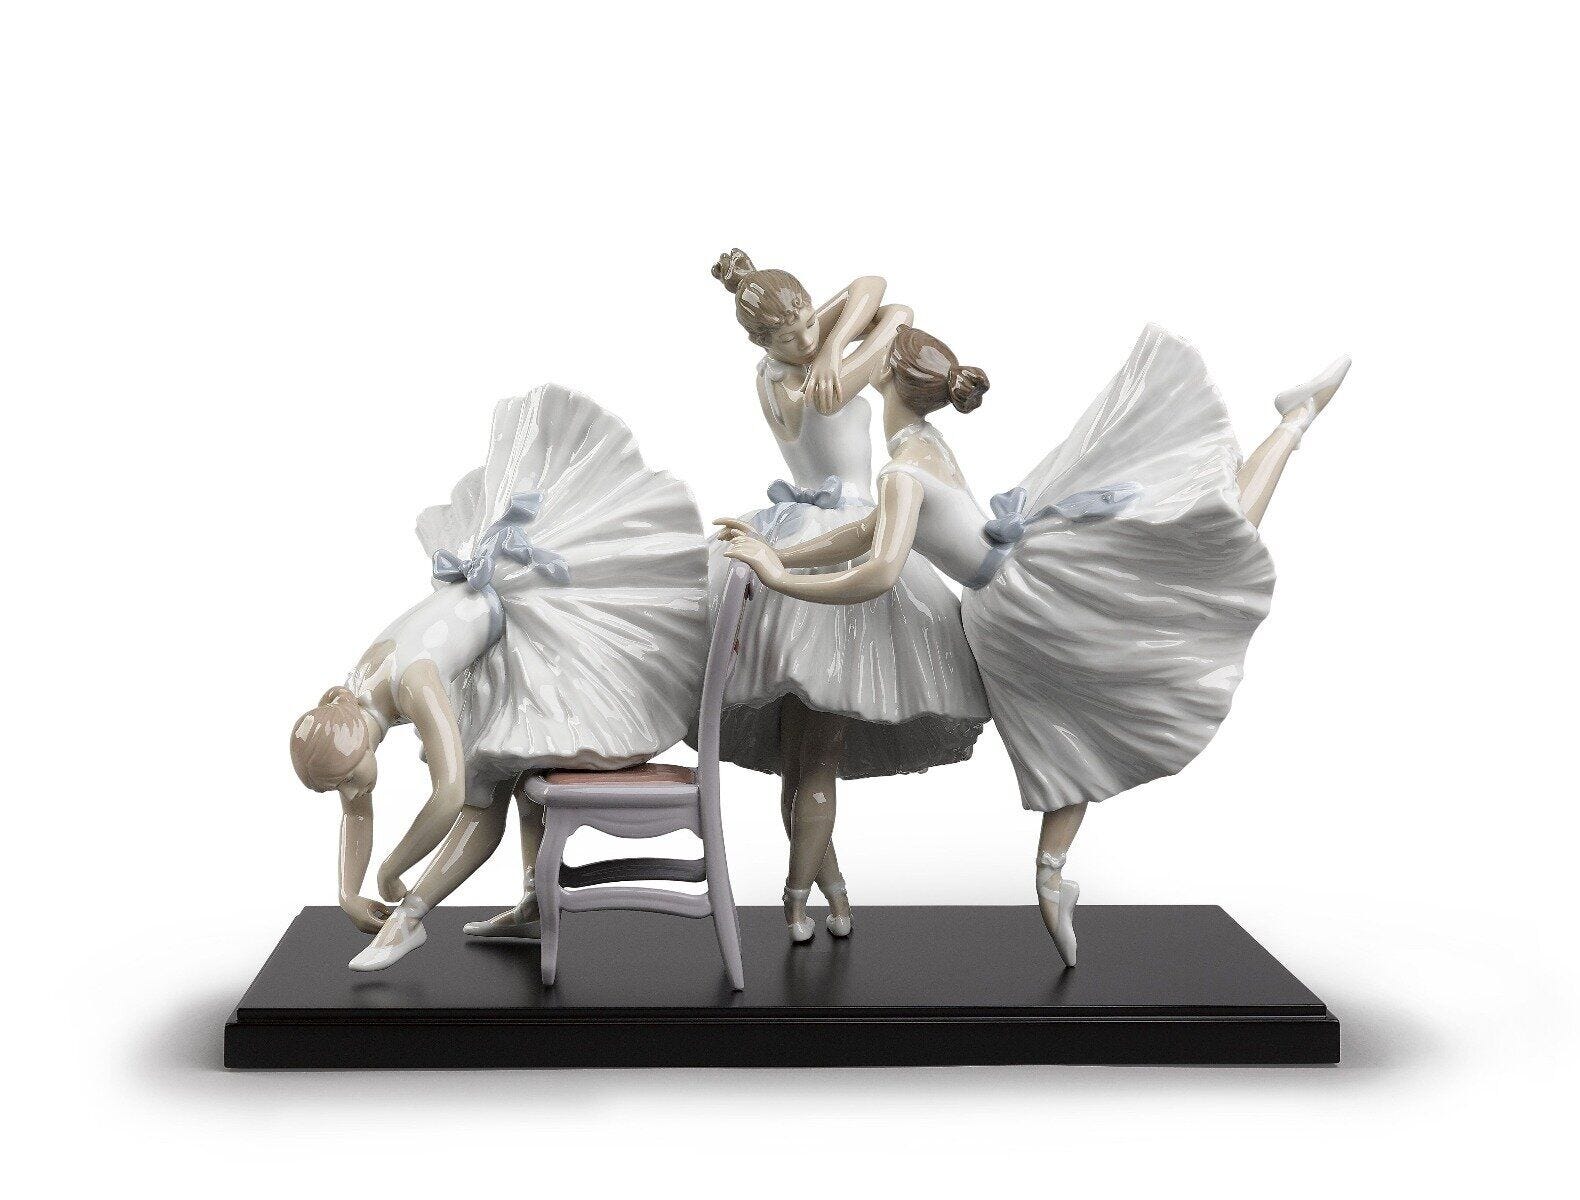 Backstage Preparation Lladro - 01015817 - Entertainment and the Arts Lladro  Figurines & Collectibles